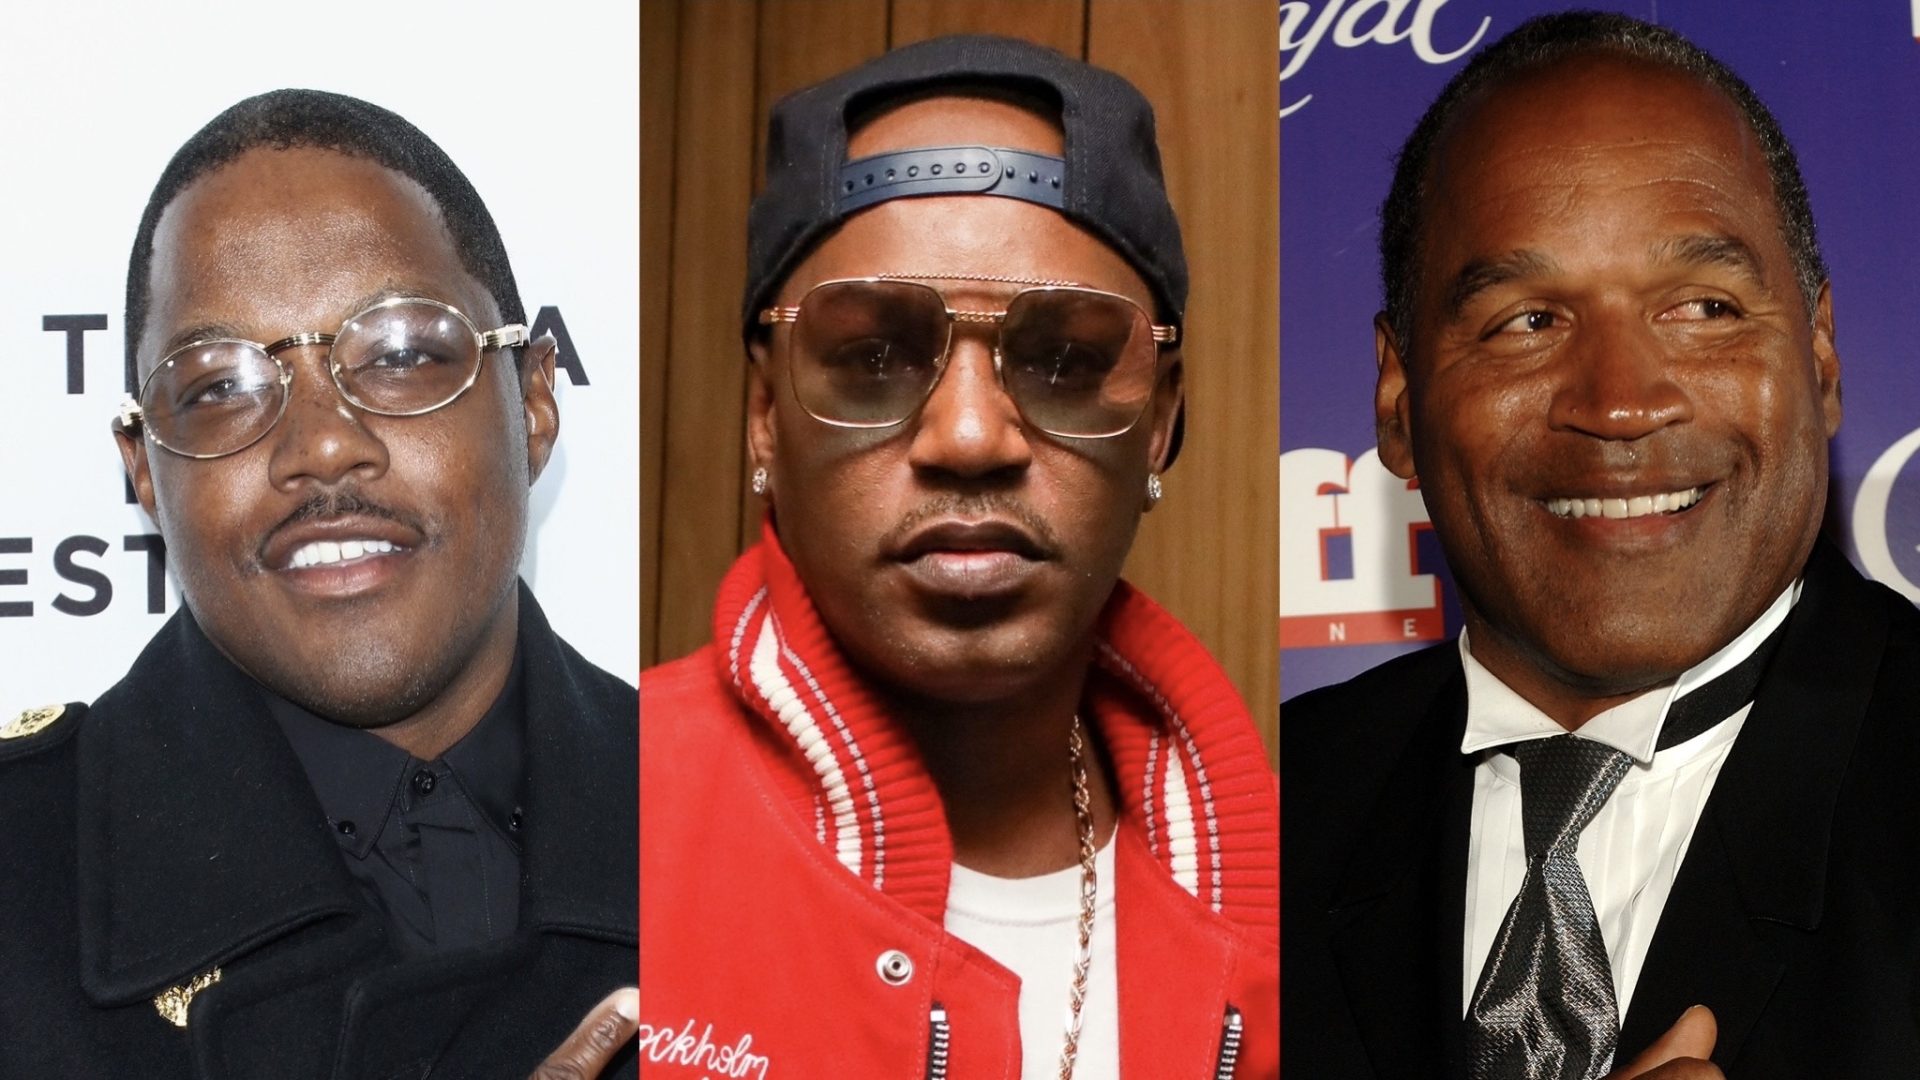 Mase And Cam'ron React To The Passing Of O.J. Simpson (Video)